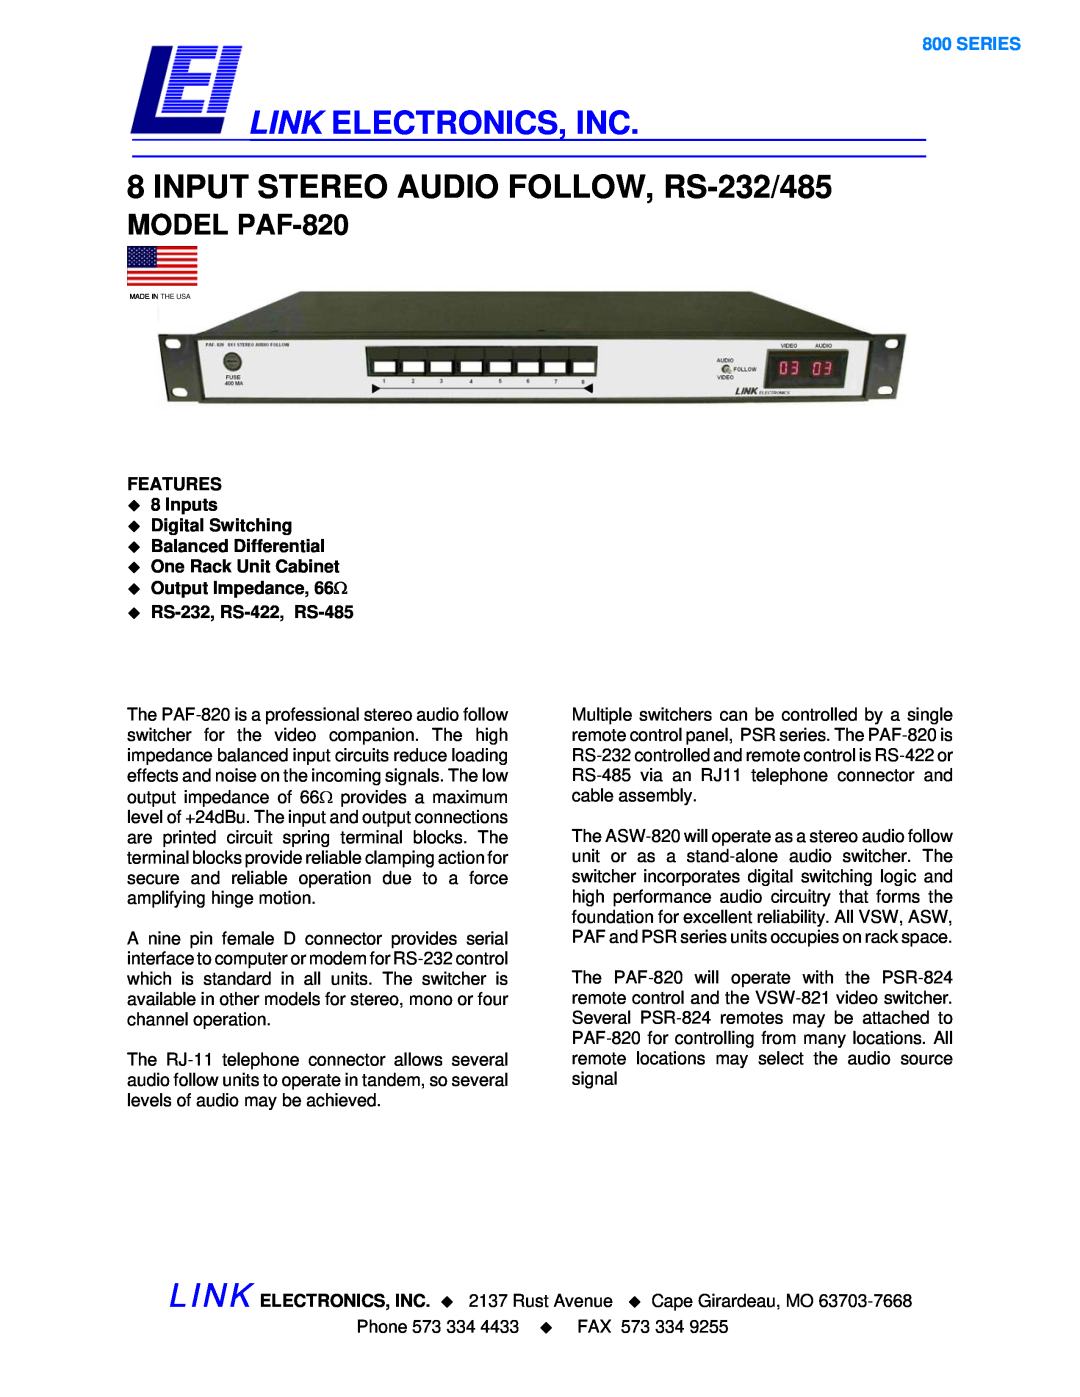 Link electronic PAF-820 manual FEATURES ‹8 Inputs ‹Digital Switching, ‹Balanced Differential ‹One Rack Unit Cabinet 